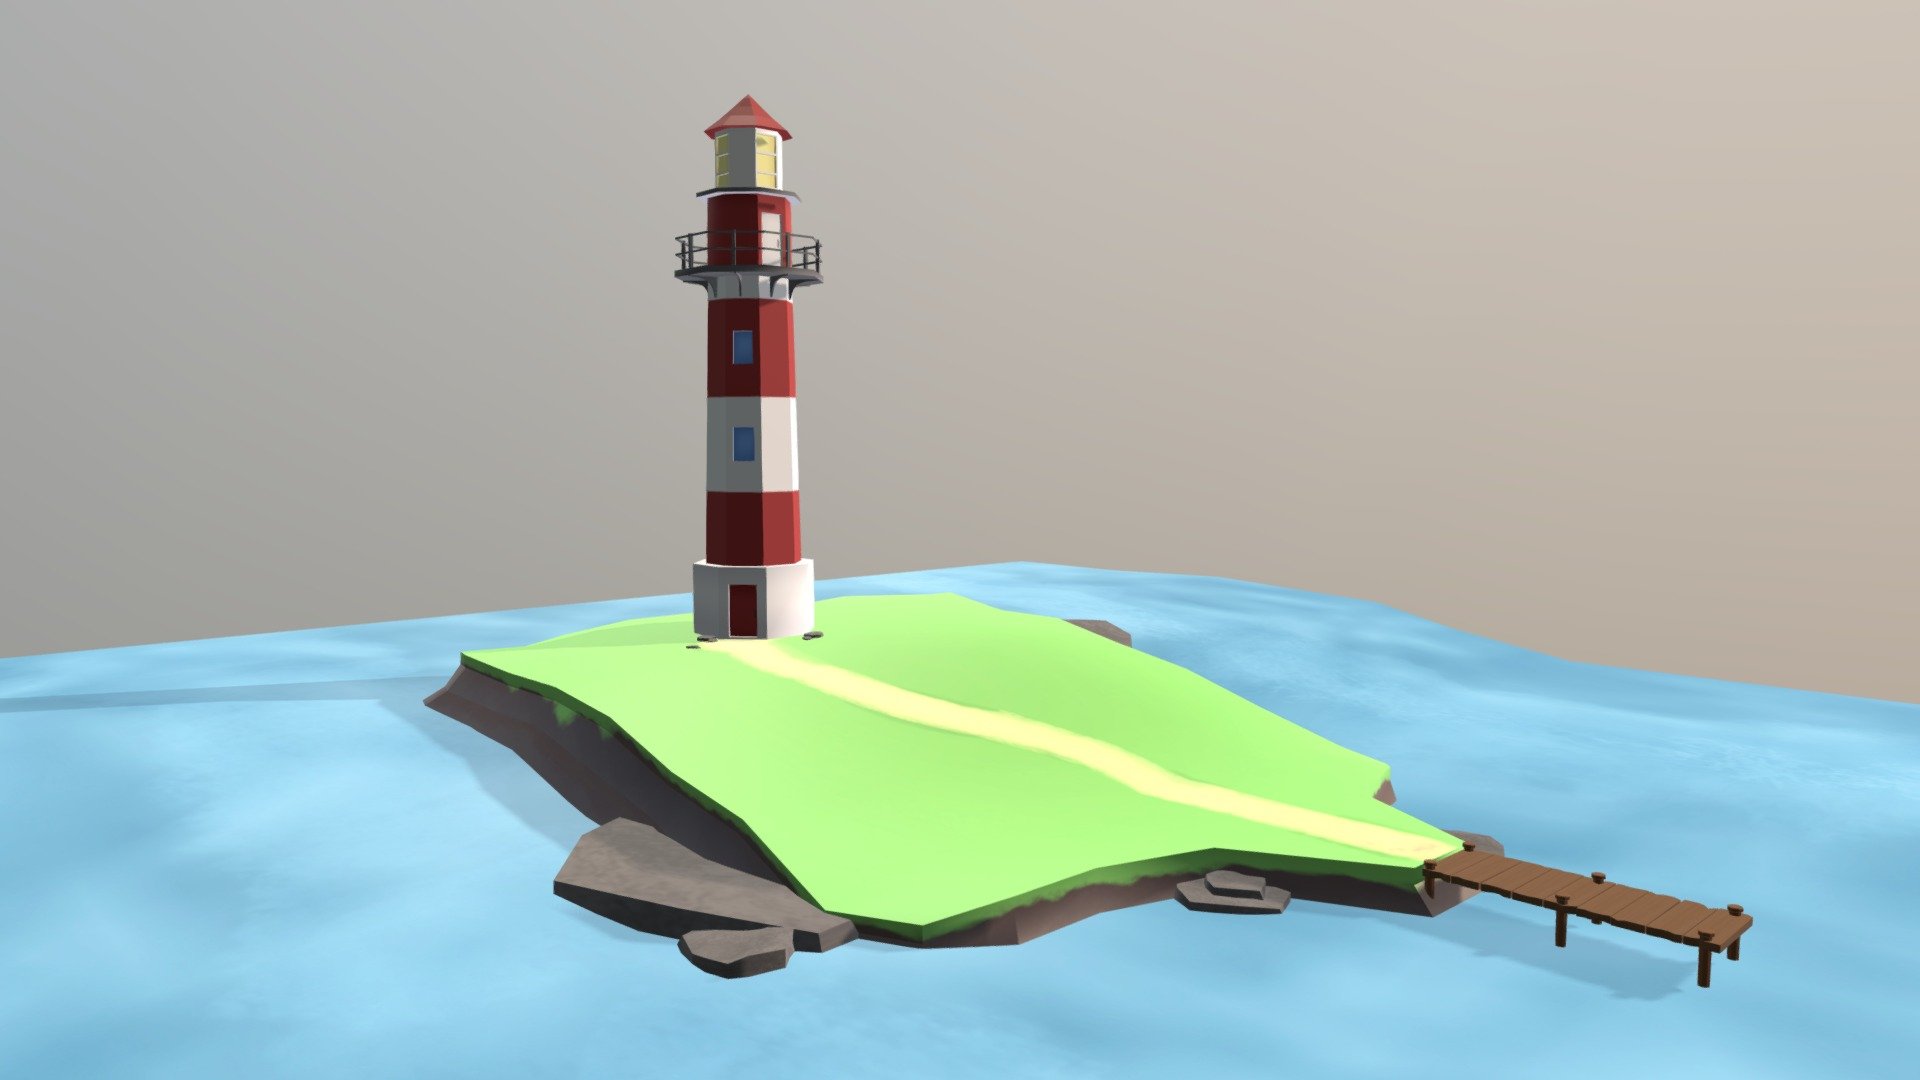 Just a cute low poly lighthouse in a island! Just wanted to experiment a bit with this ideia 3d model